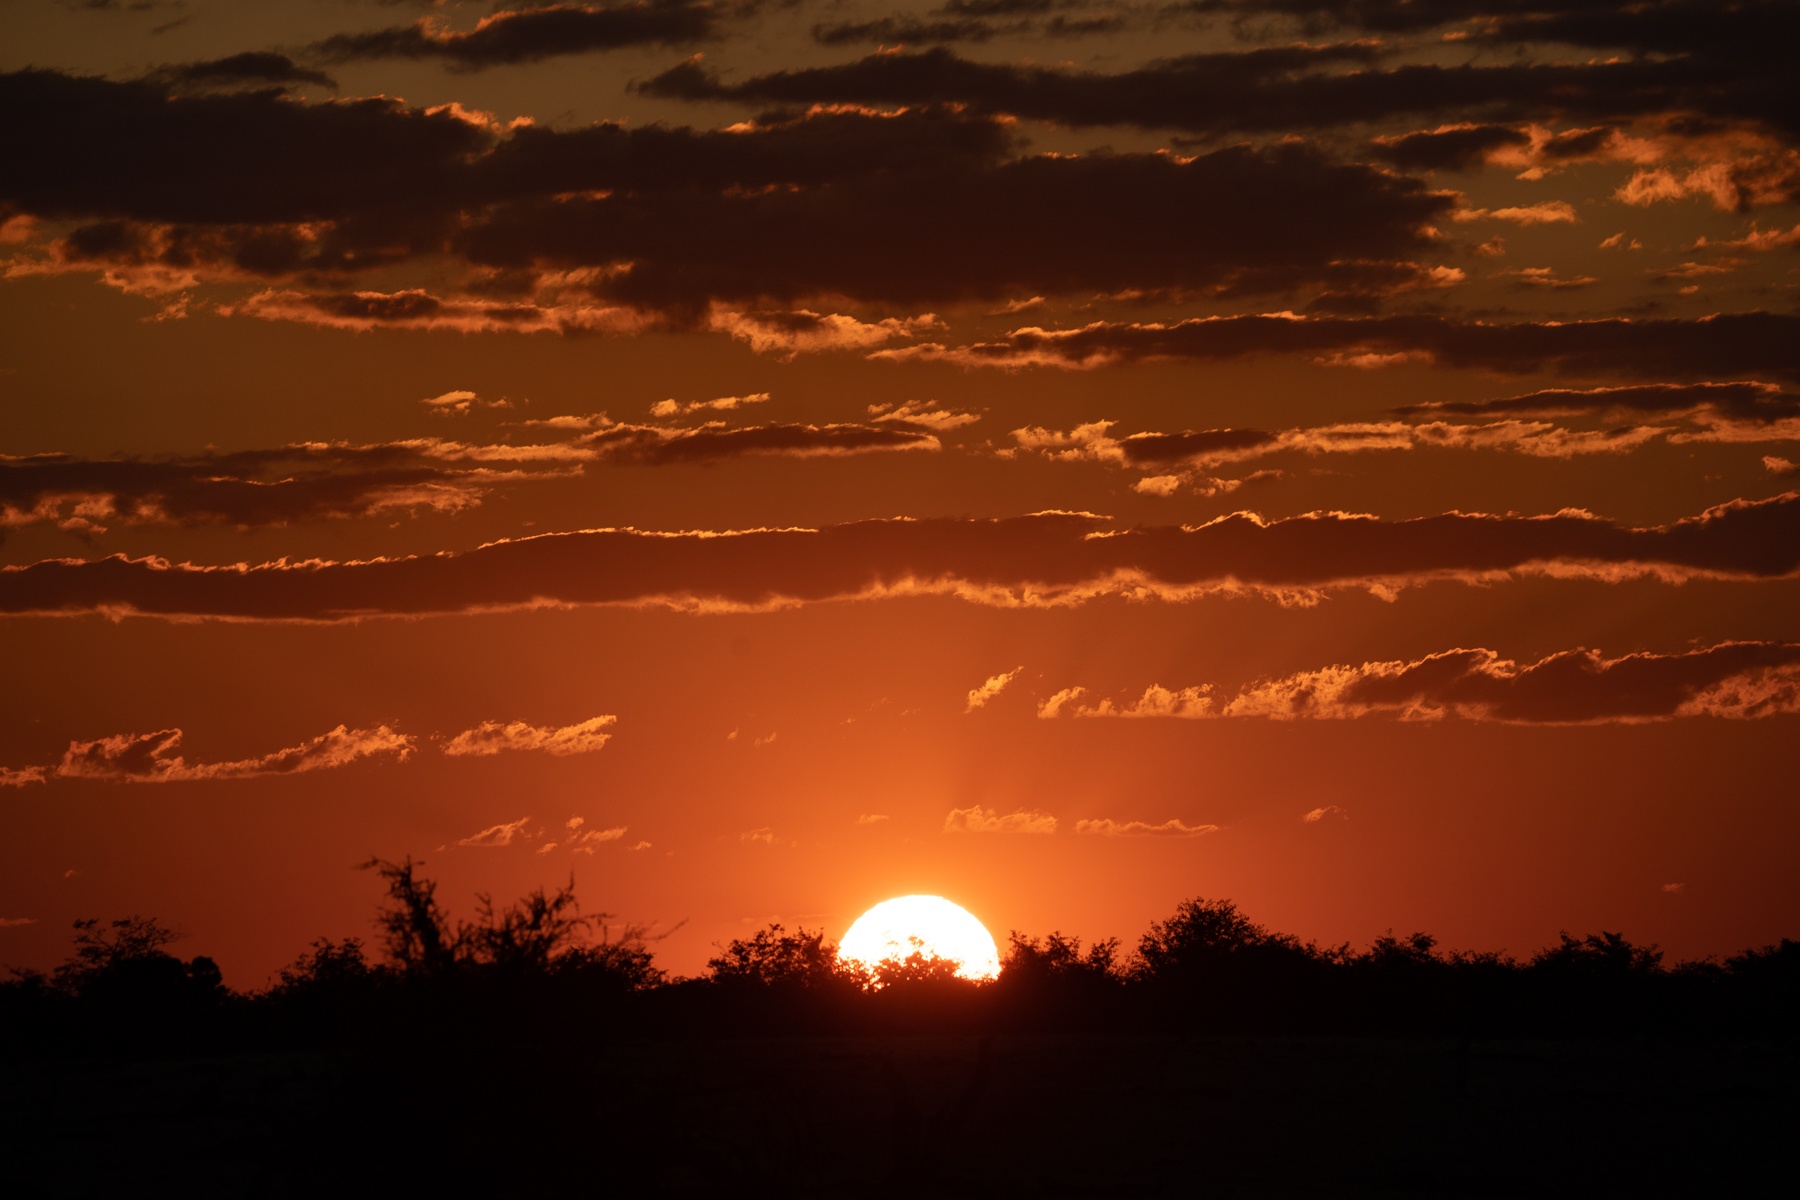 Can you ever photograph too many African sunsets?